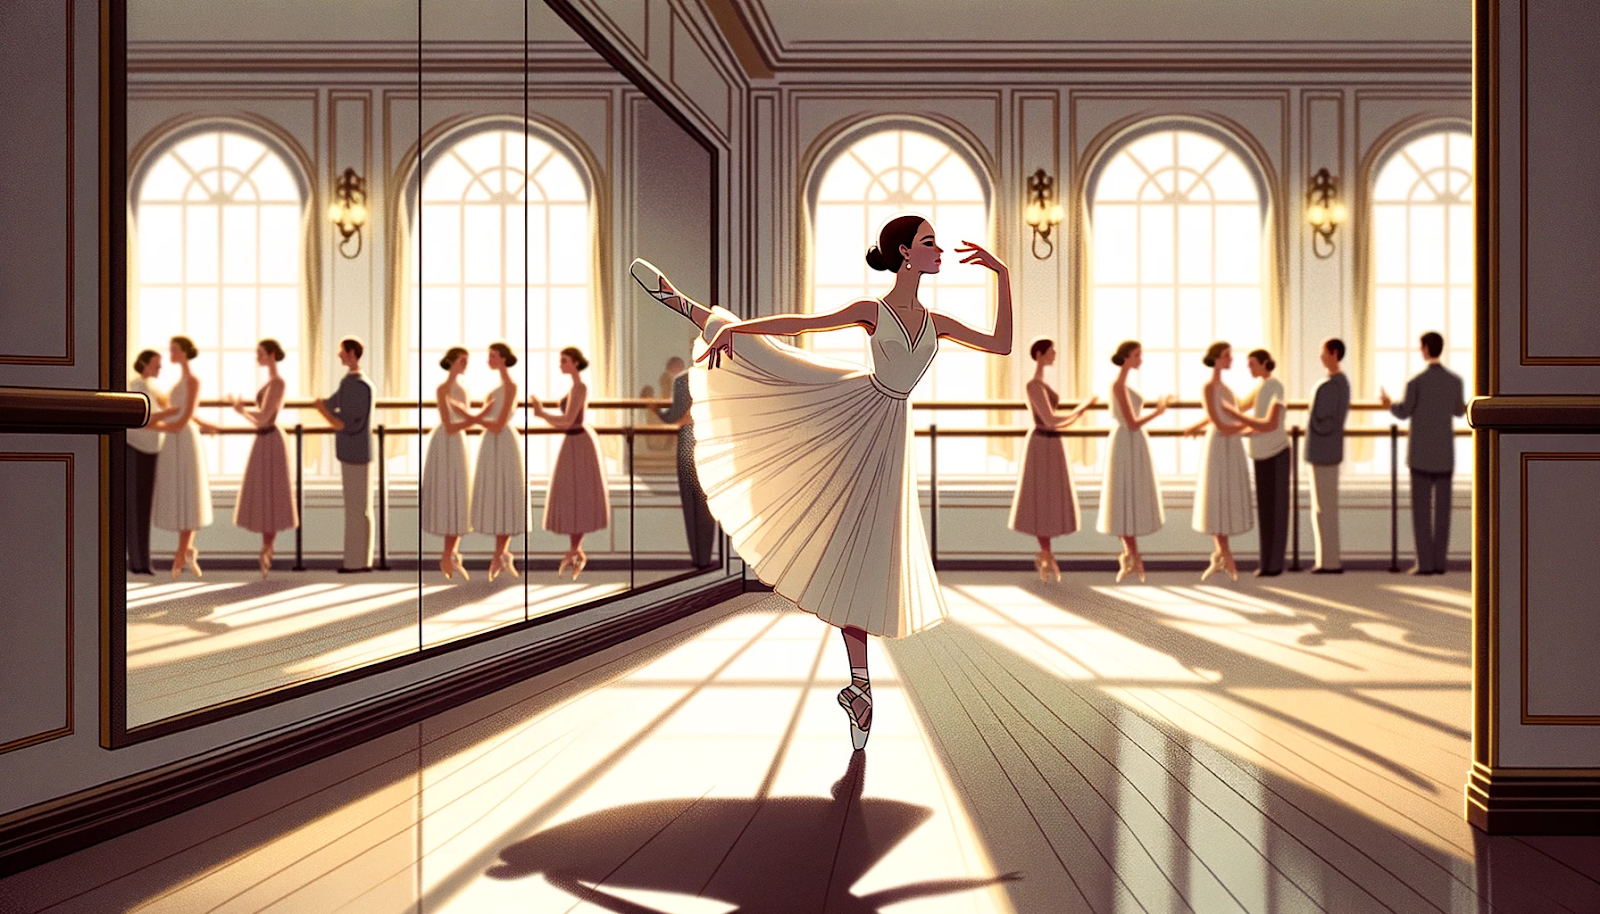 Illustration of Elena in her spacious dance studio. Mirrors around her reflect a younger Elena dancing with passion. The room is bathed in a soft golden glow, emphasizing her graceful movements. Shadows hint at spectators watching her, their expressions a mix of admiration and pity.